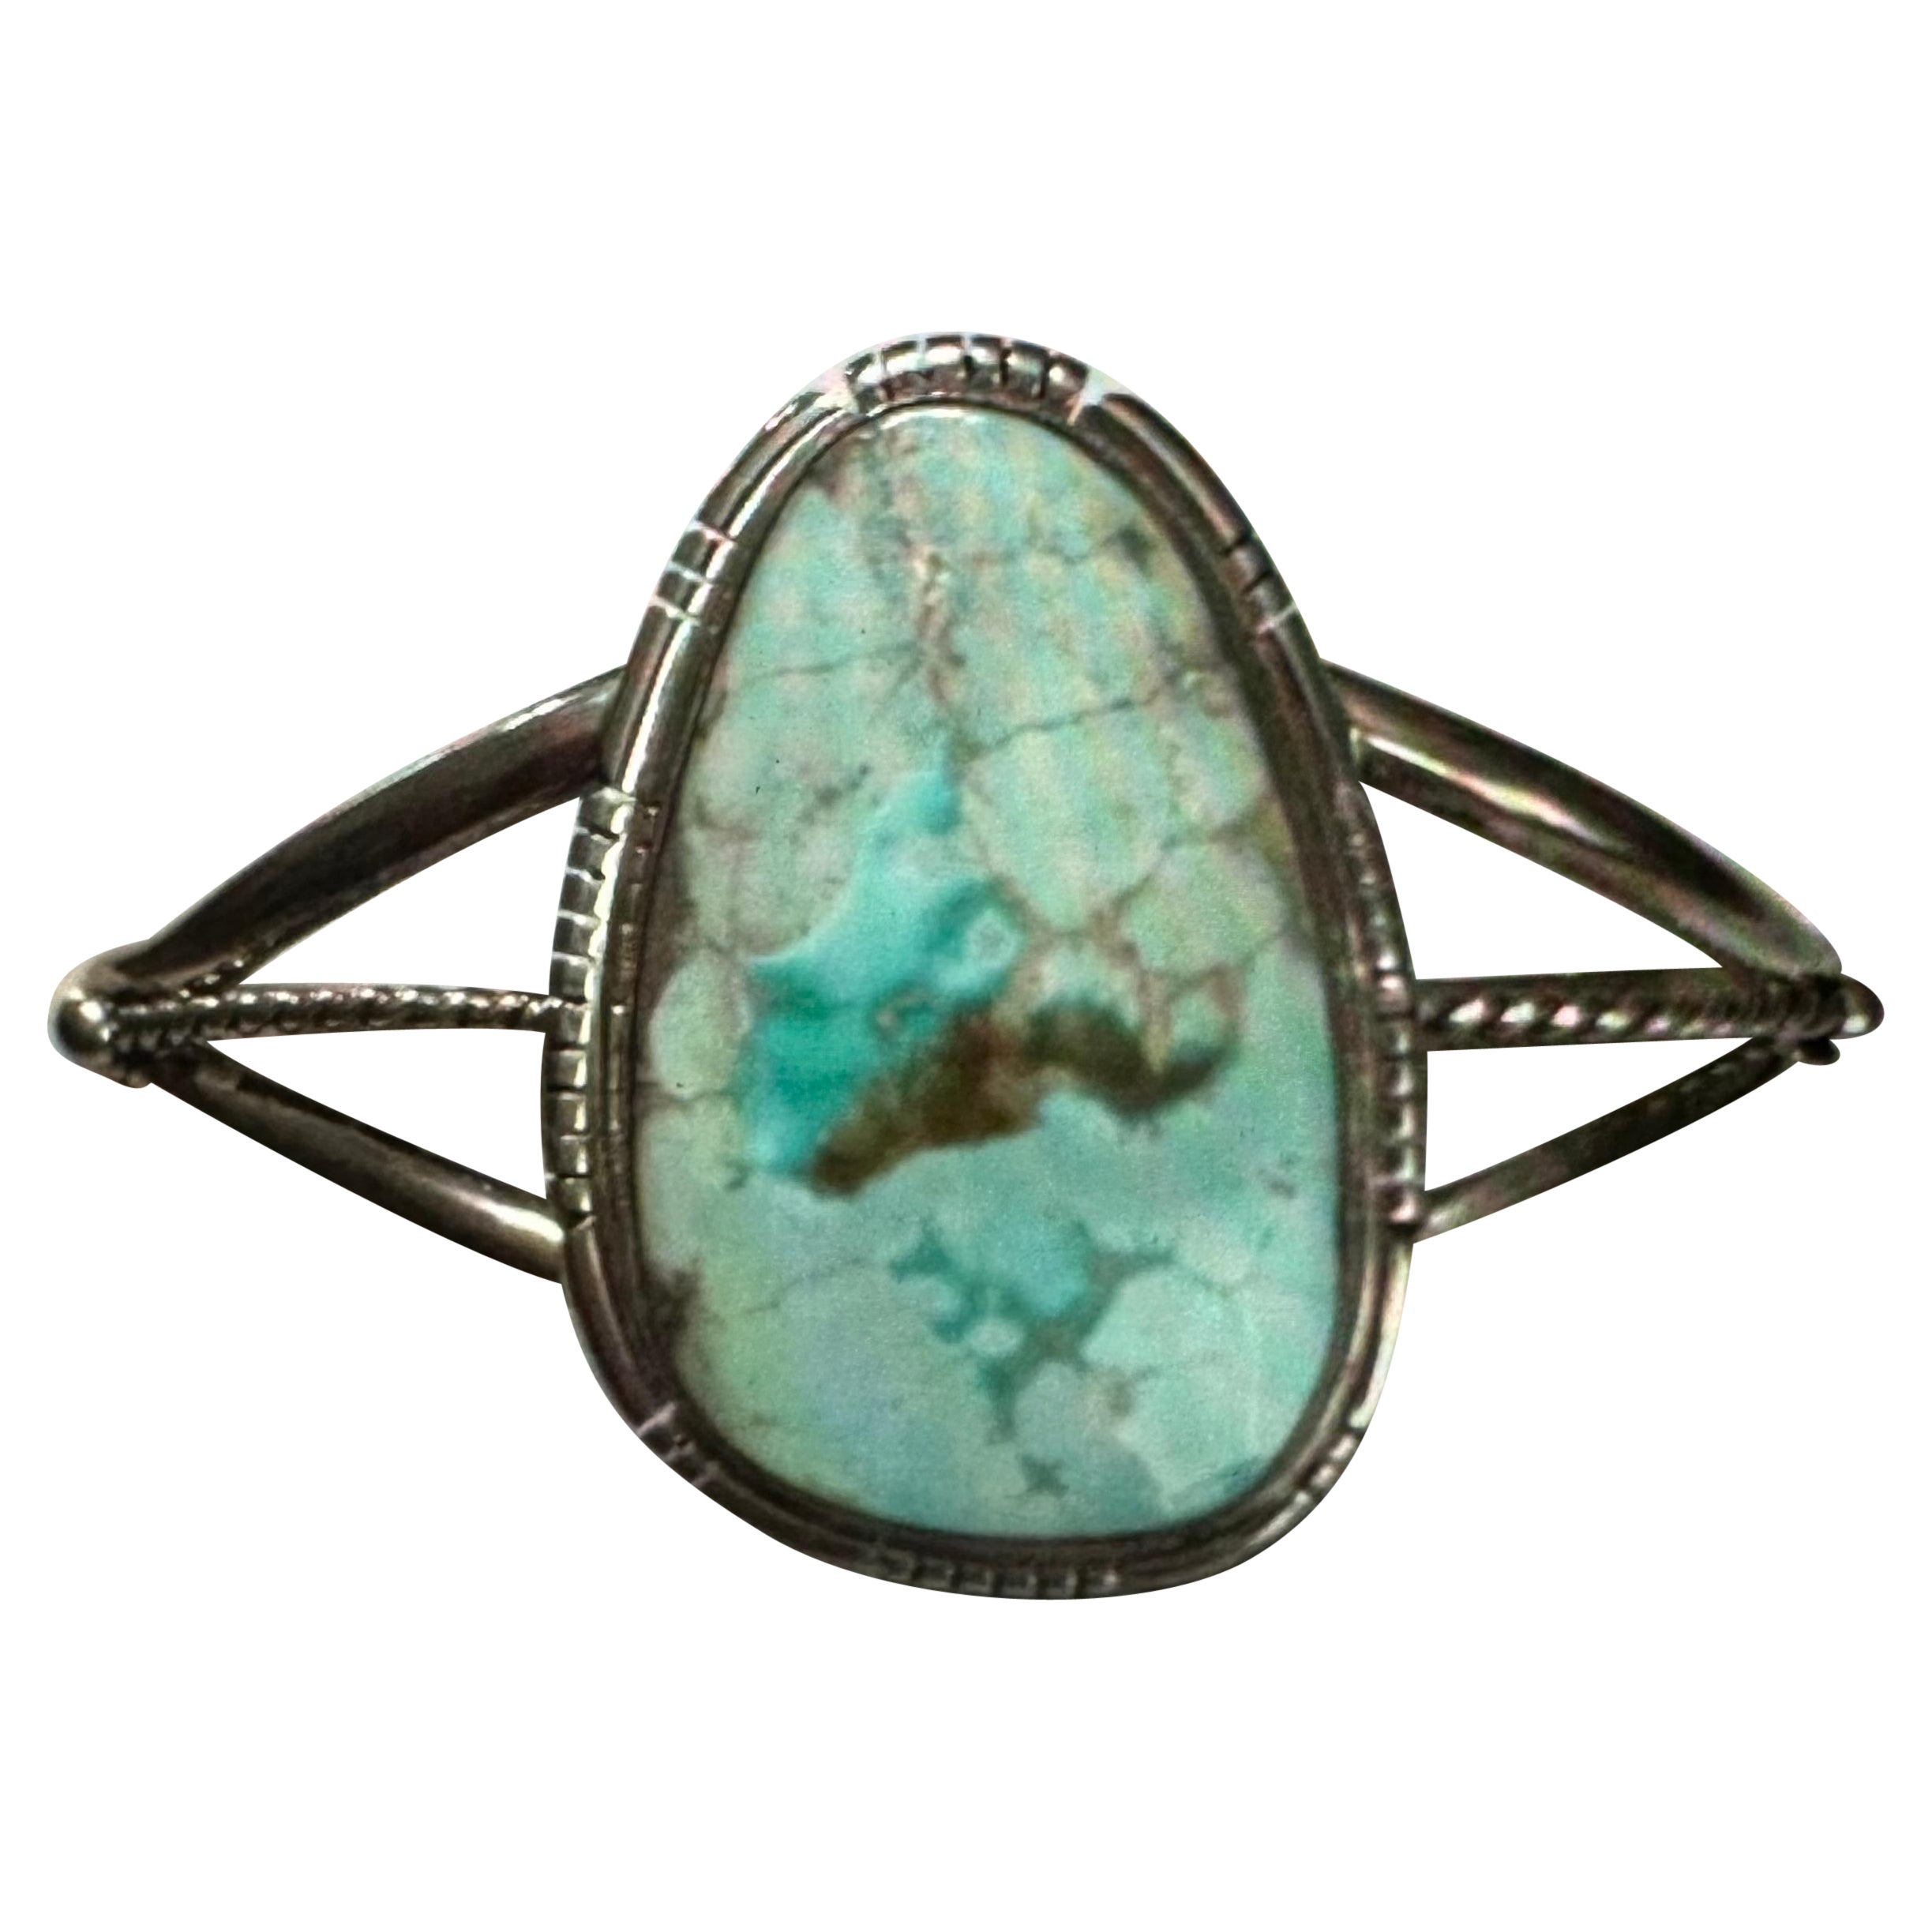 Sterling Silver .925 1"x 1 1/2" Kingman Turquoise Cuff Bracelet by Dave Skeets